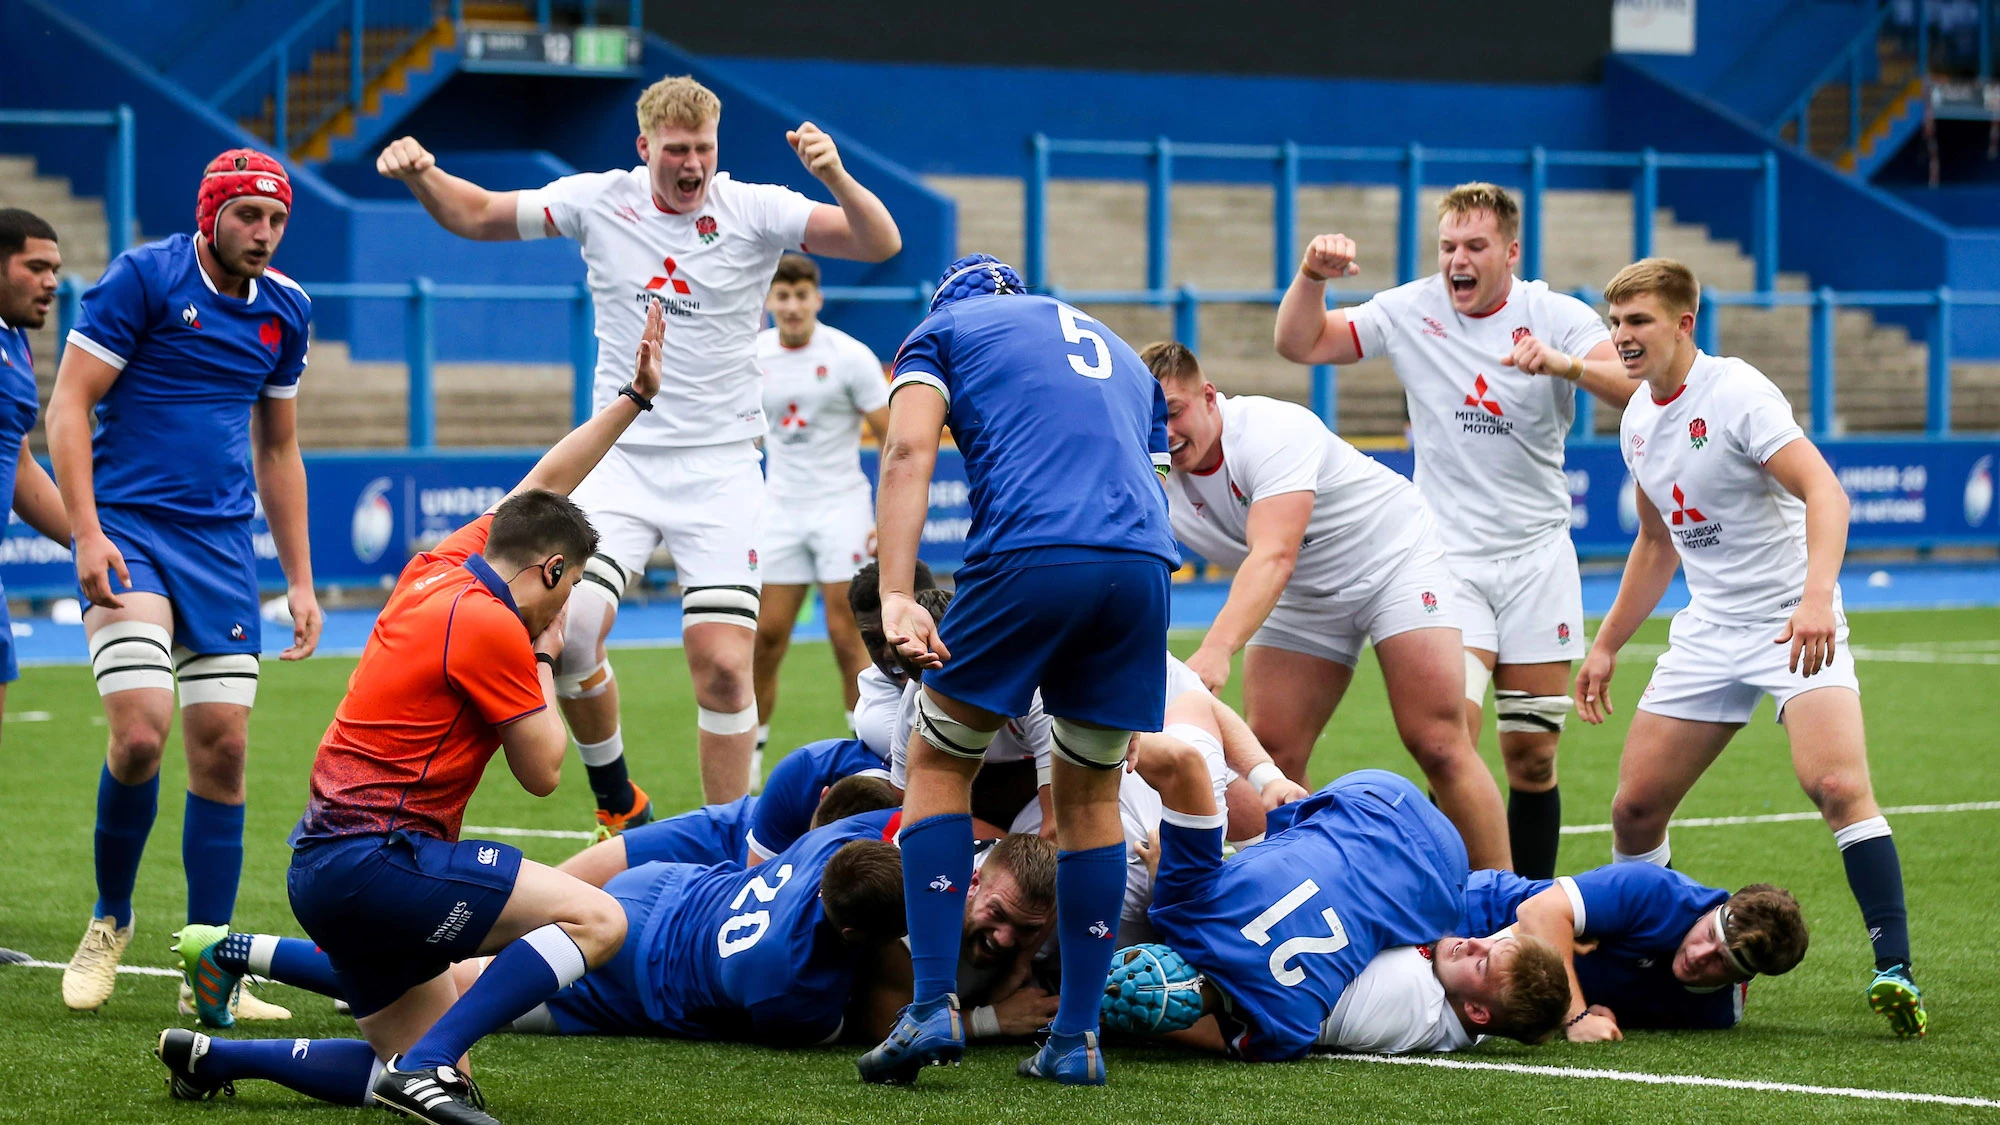 England players celebrate after Sam Riley scores a try 19/6/2021